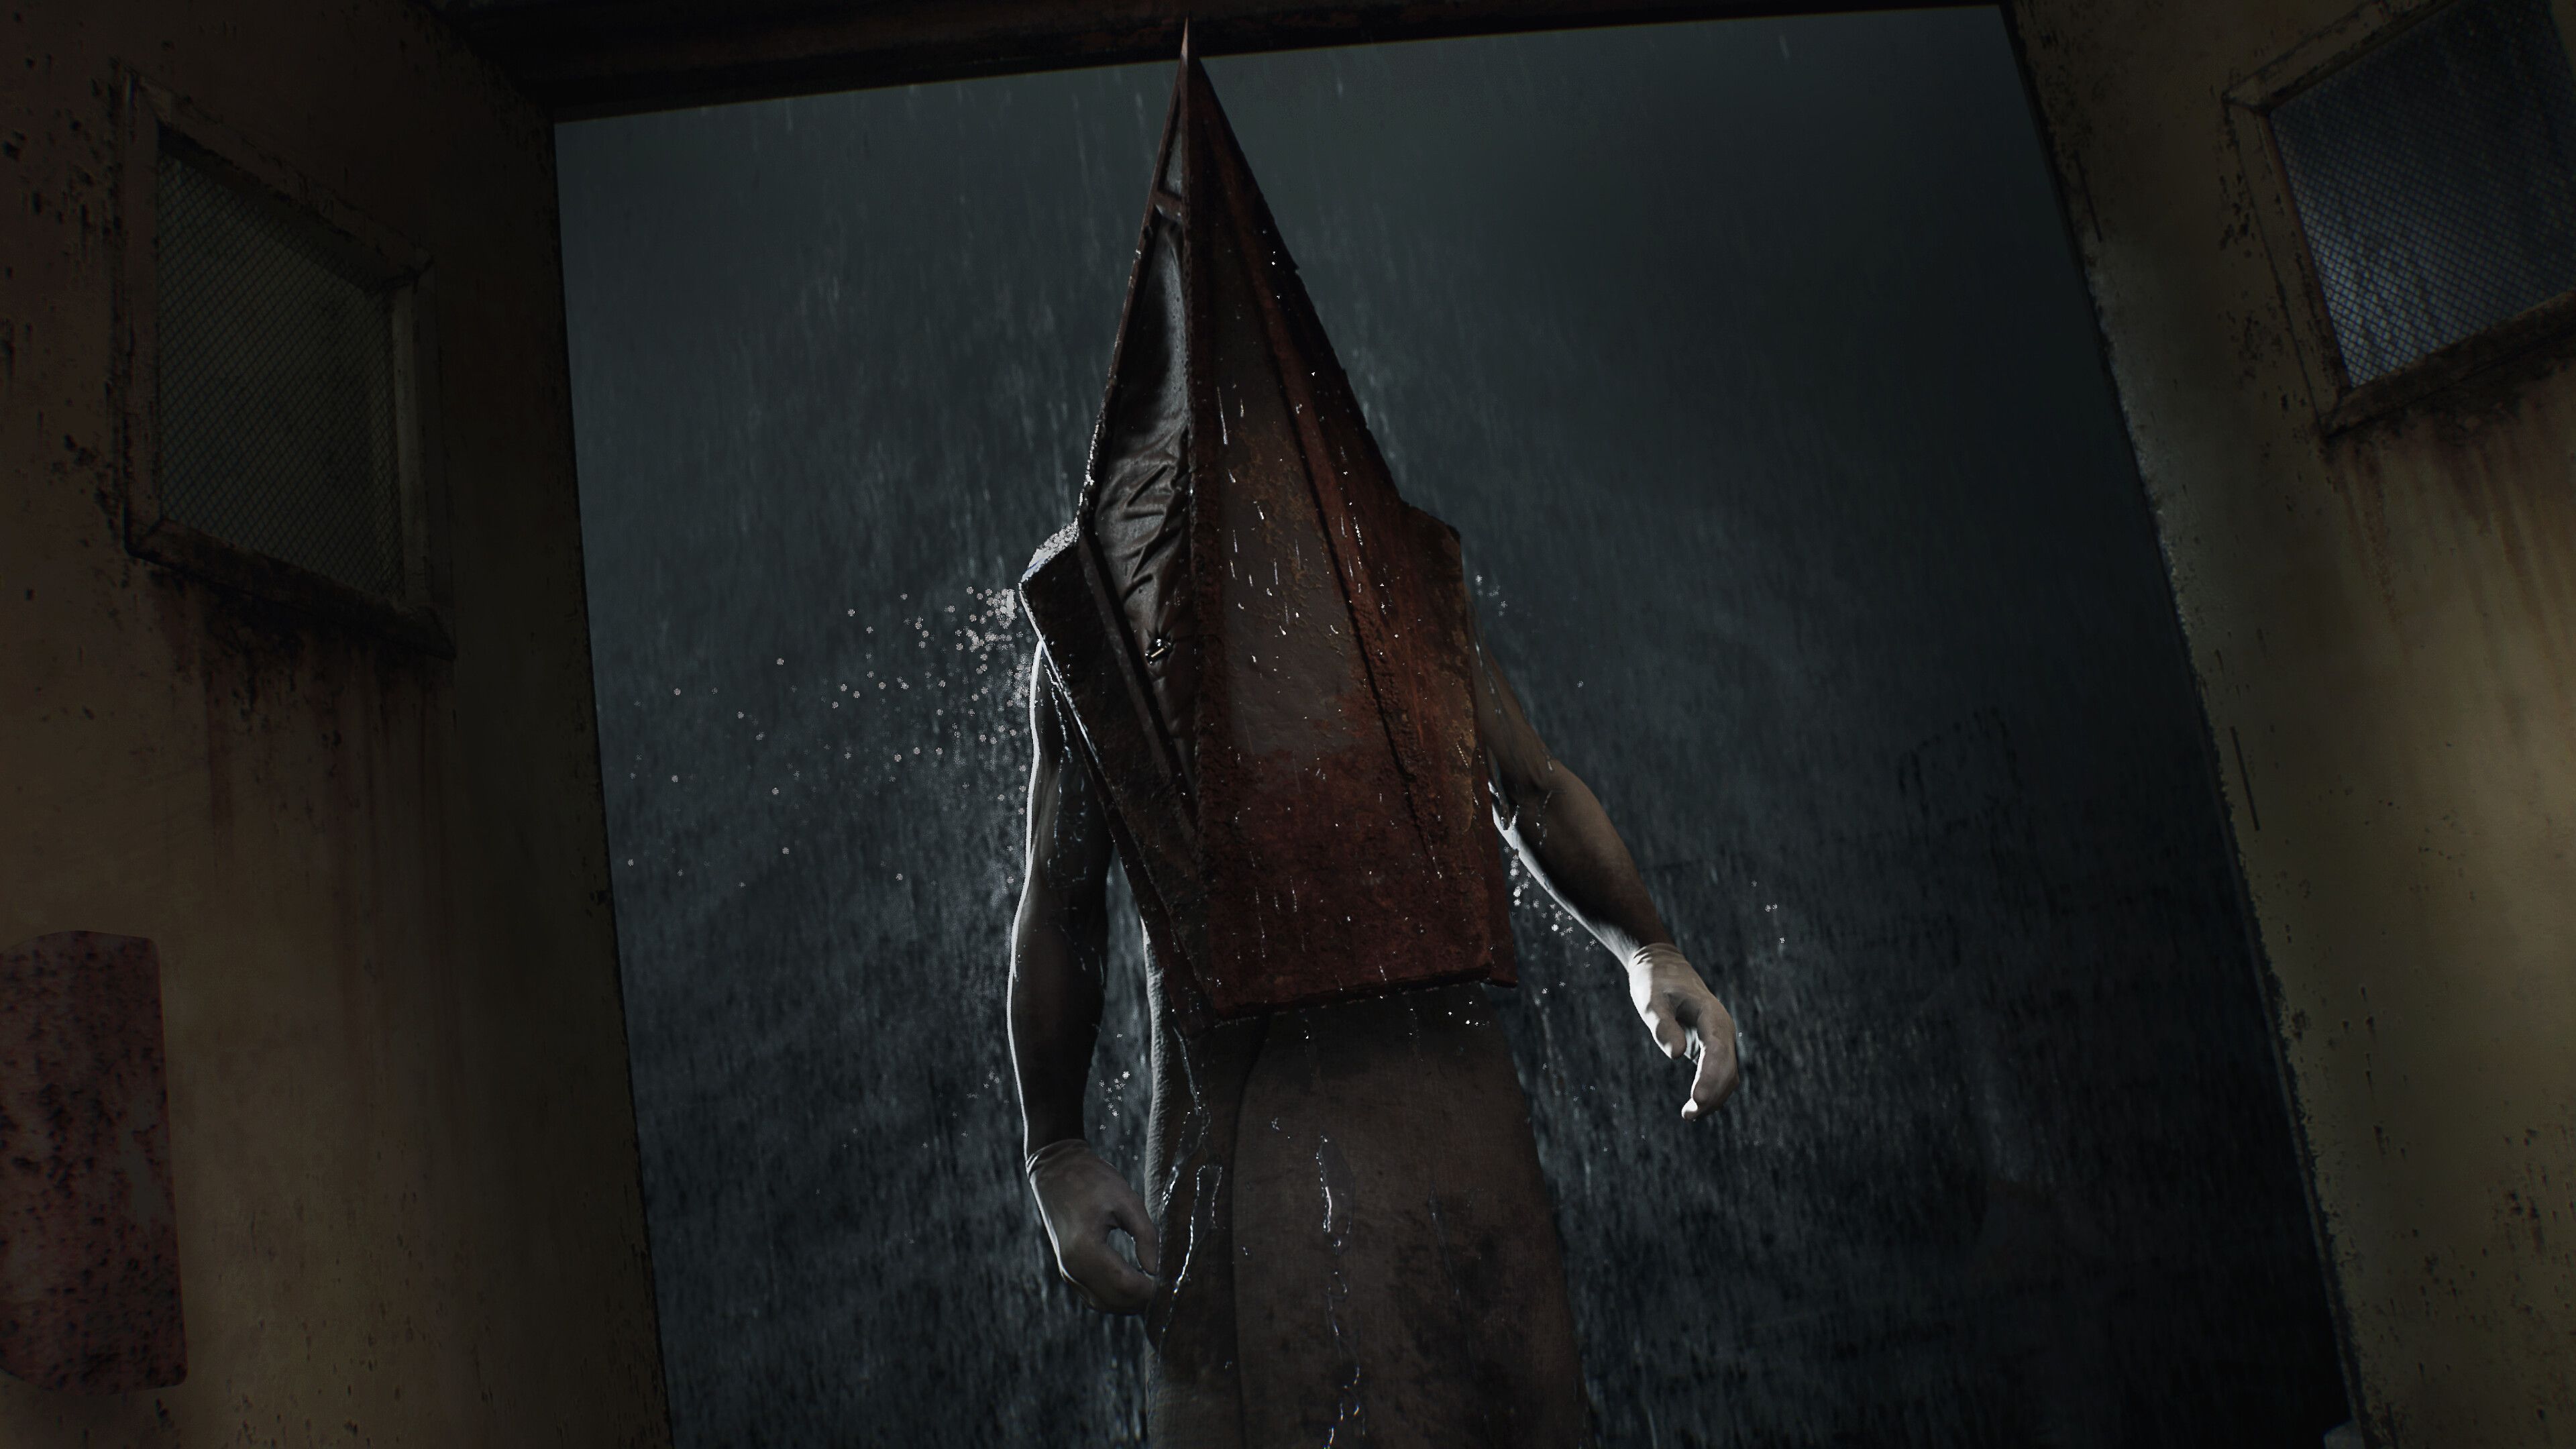 Silent Hill May Be Losing Touch with What Made It So Special